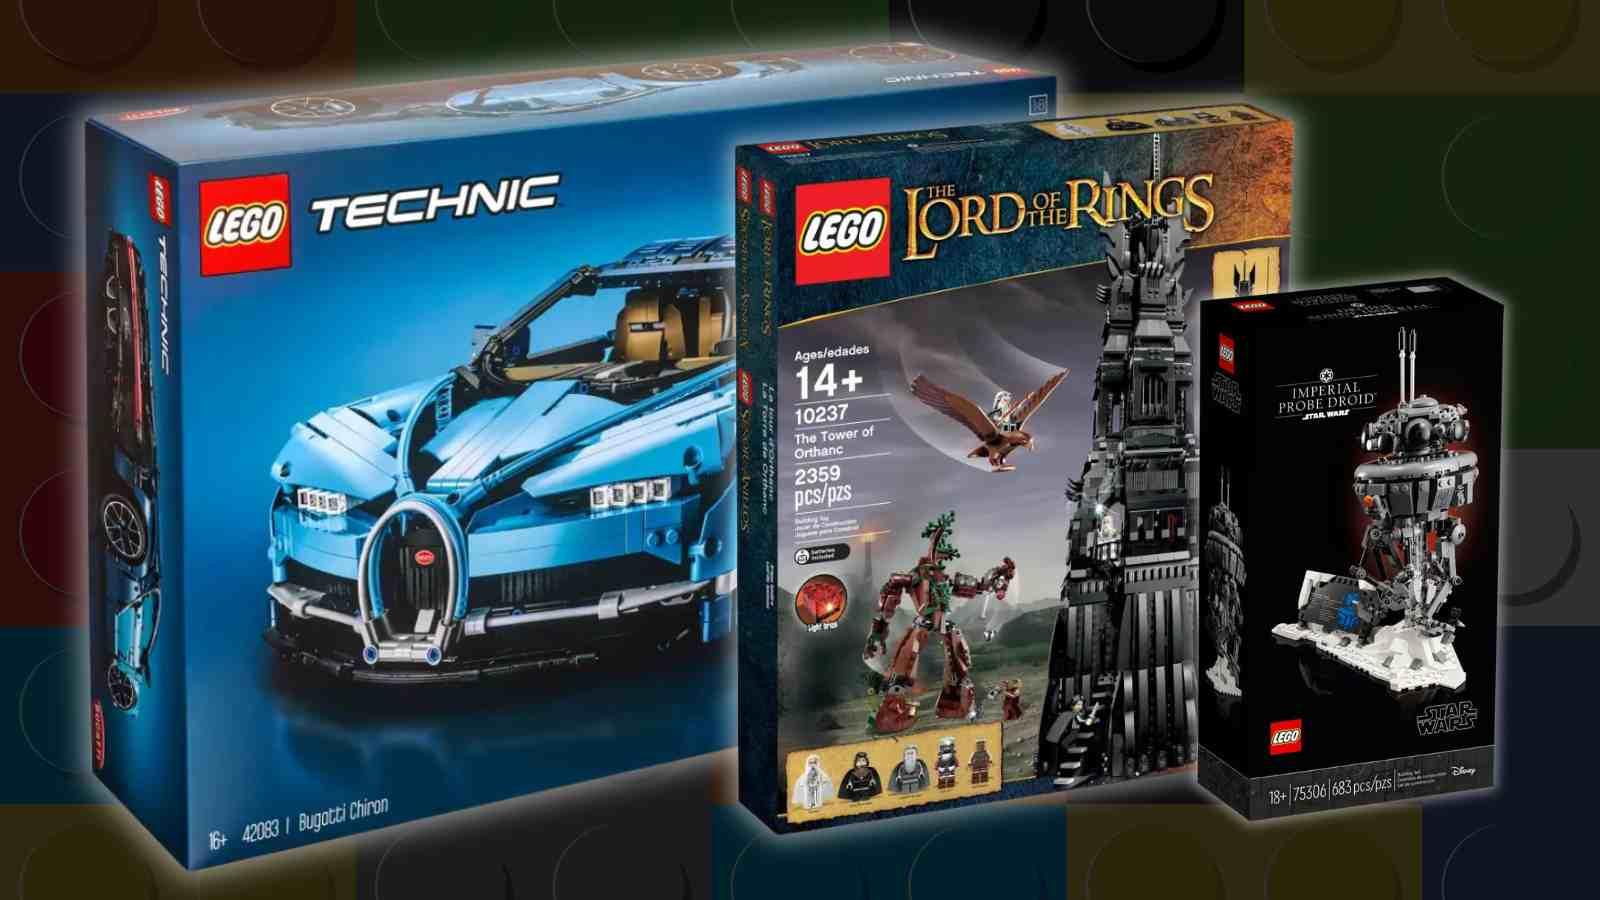 Three of the retired LEGO sets that are still available at Amazon